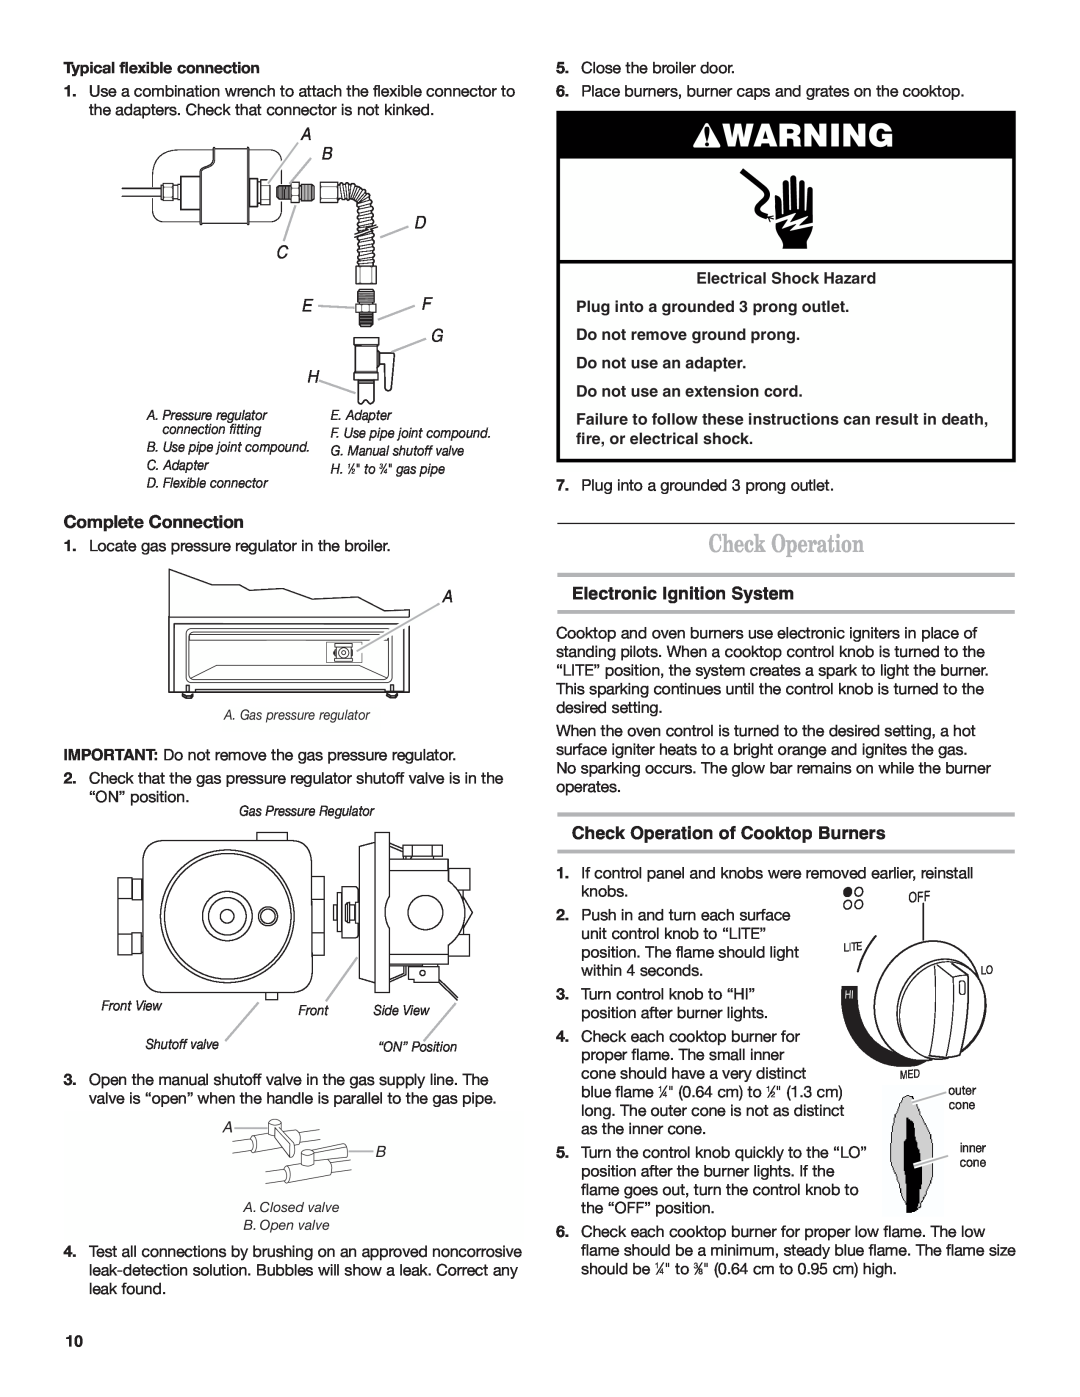 Estate W10173755D Complete Connection, Electronic Ignition System, Check Operation of Cooktop Burners 